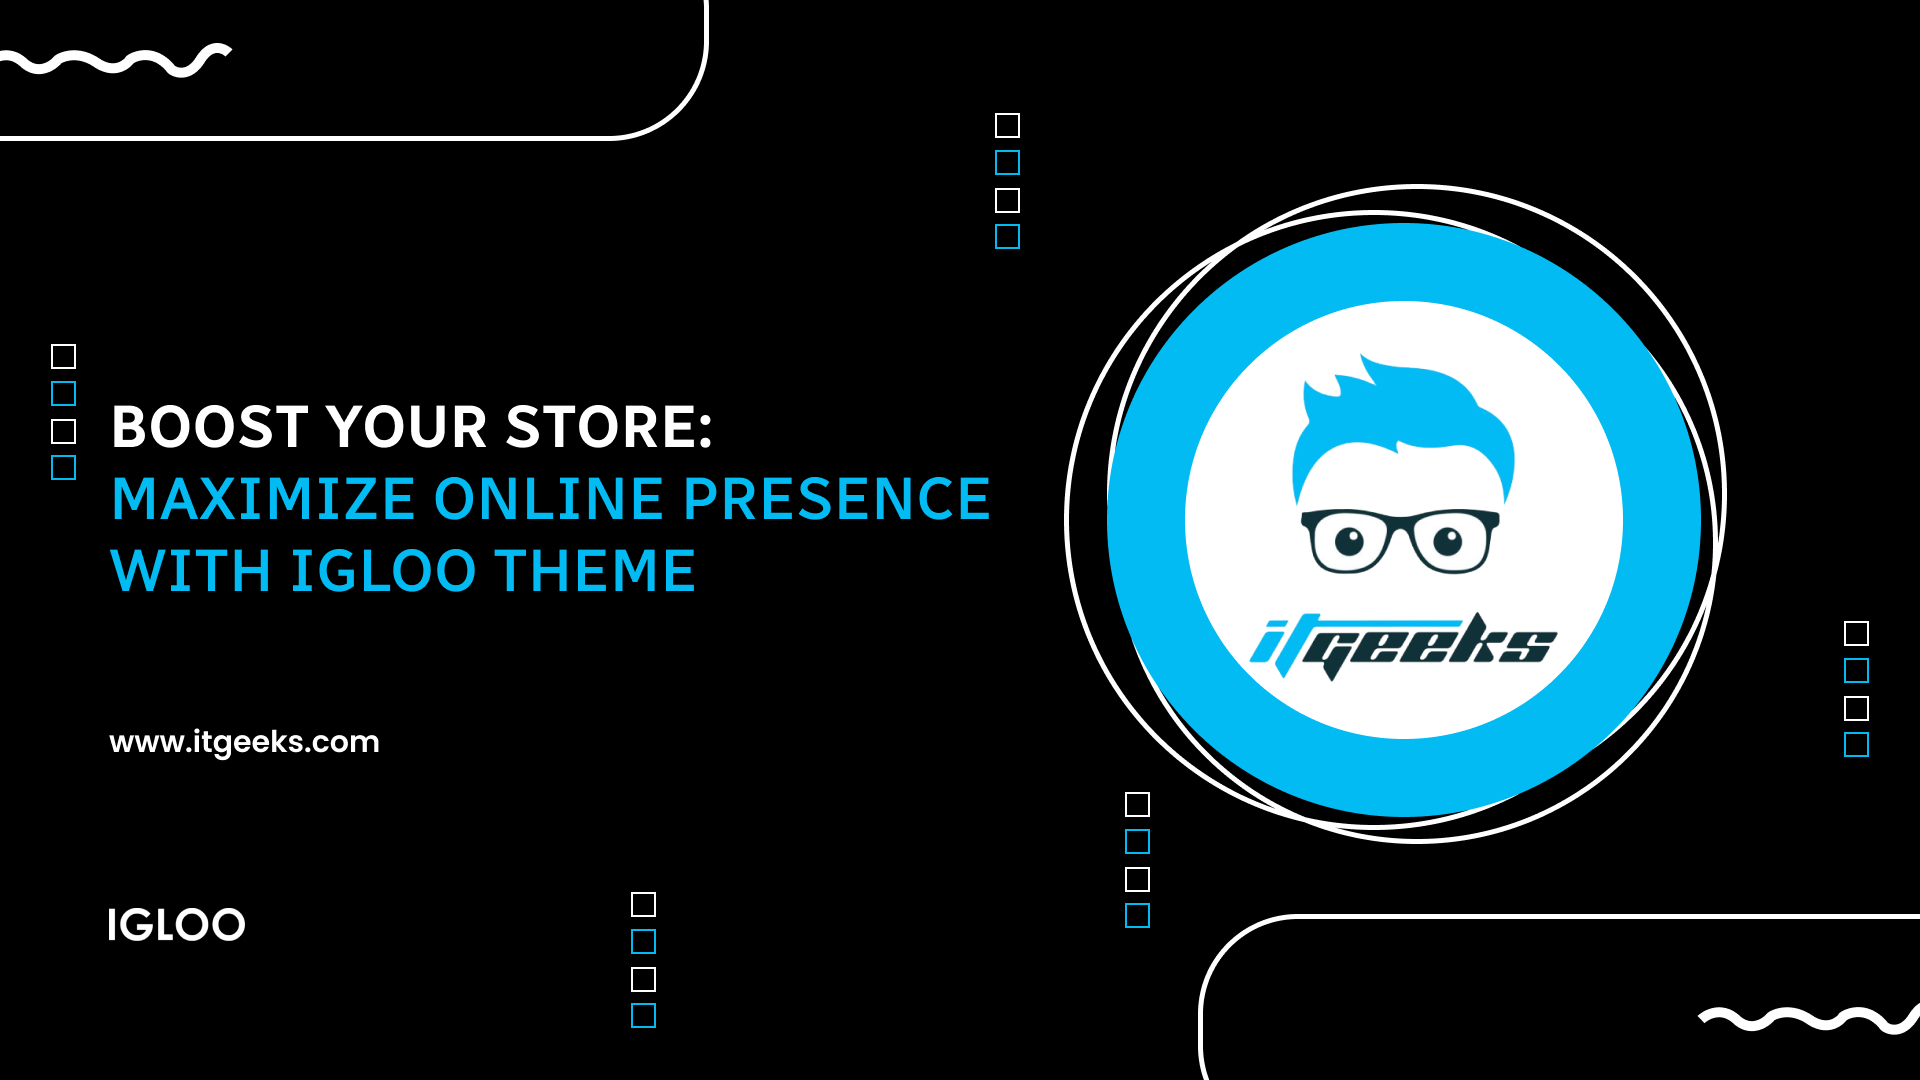 Boost Your Store: Maximize Online Presence with Igloo Theme